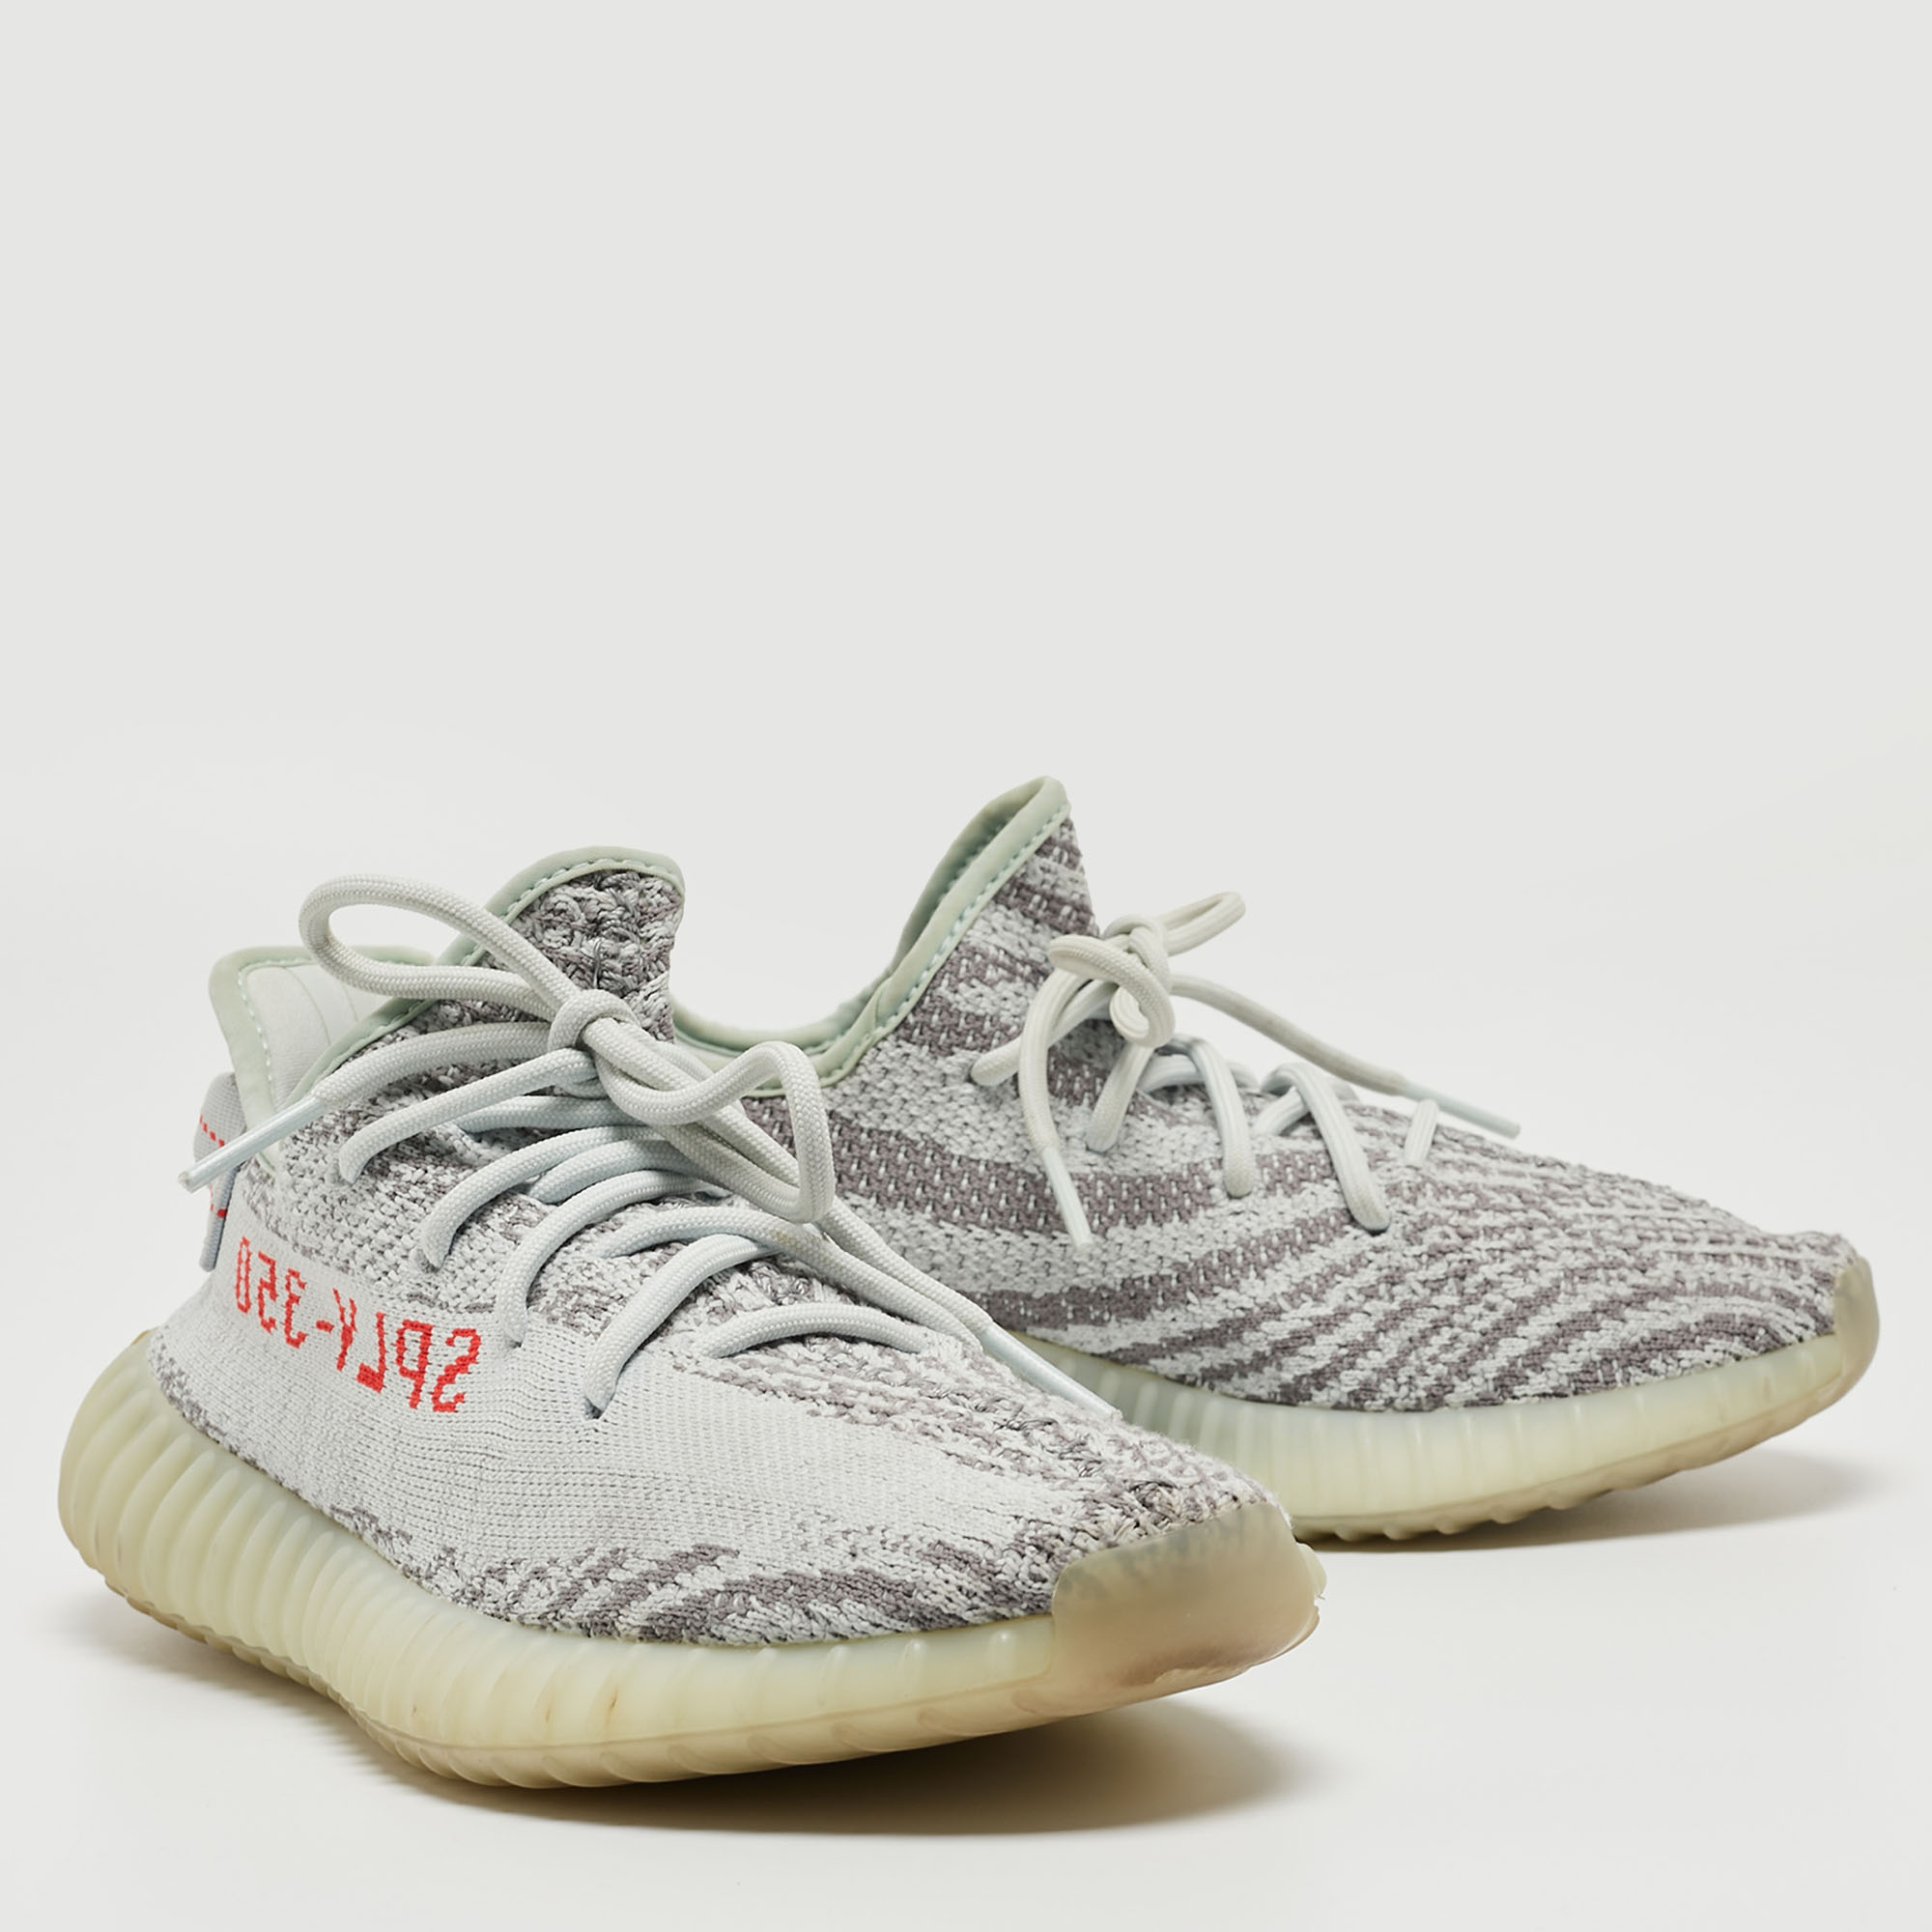 Yeezy X Adidas Grey Knit Fabric Boost 350 V2 Blue Tint Sneakers Size 40 2/3